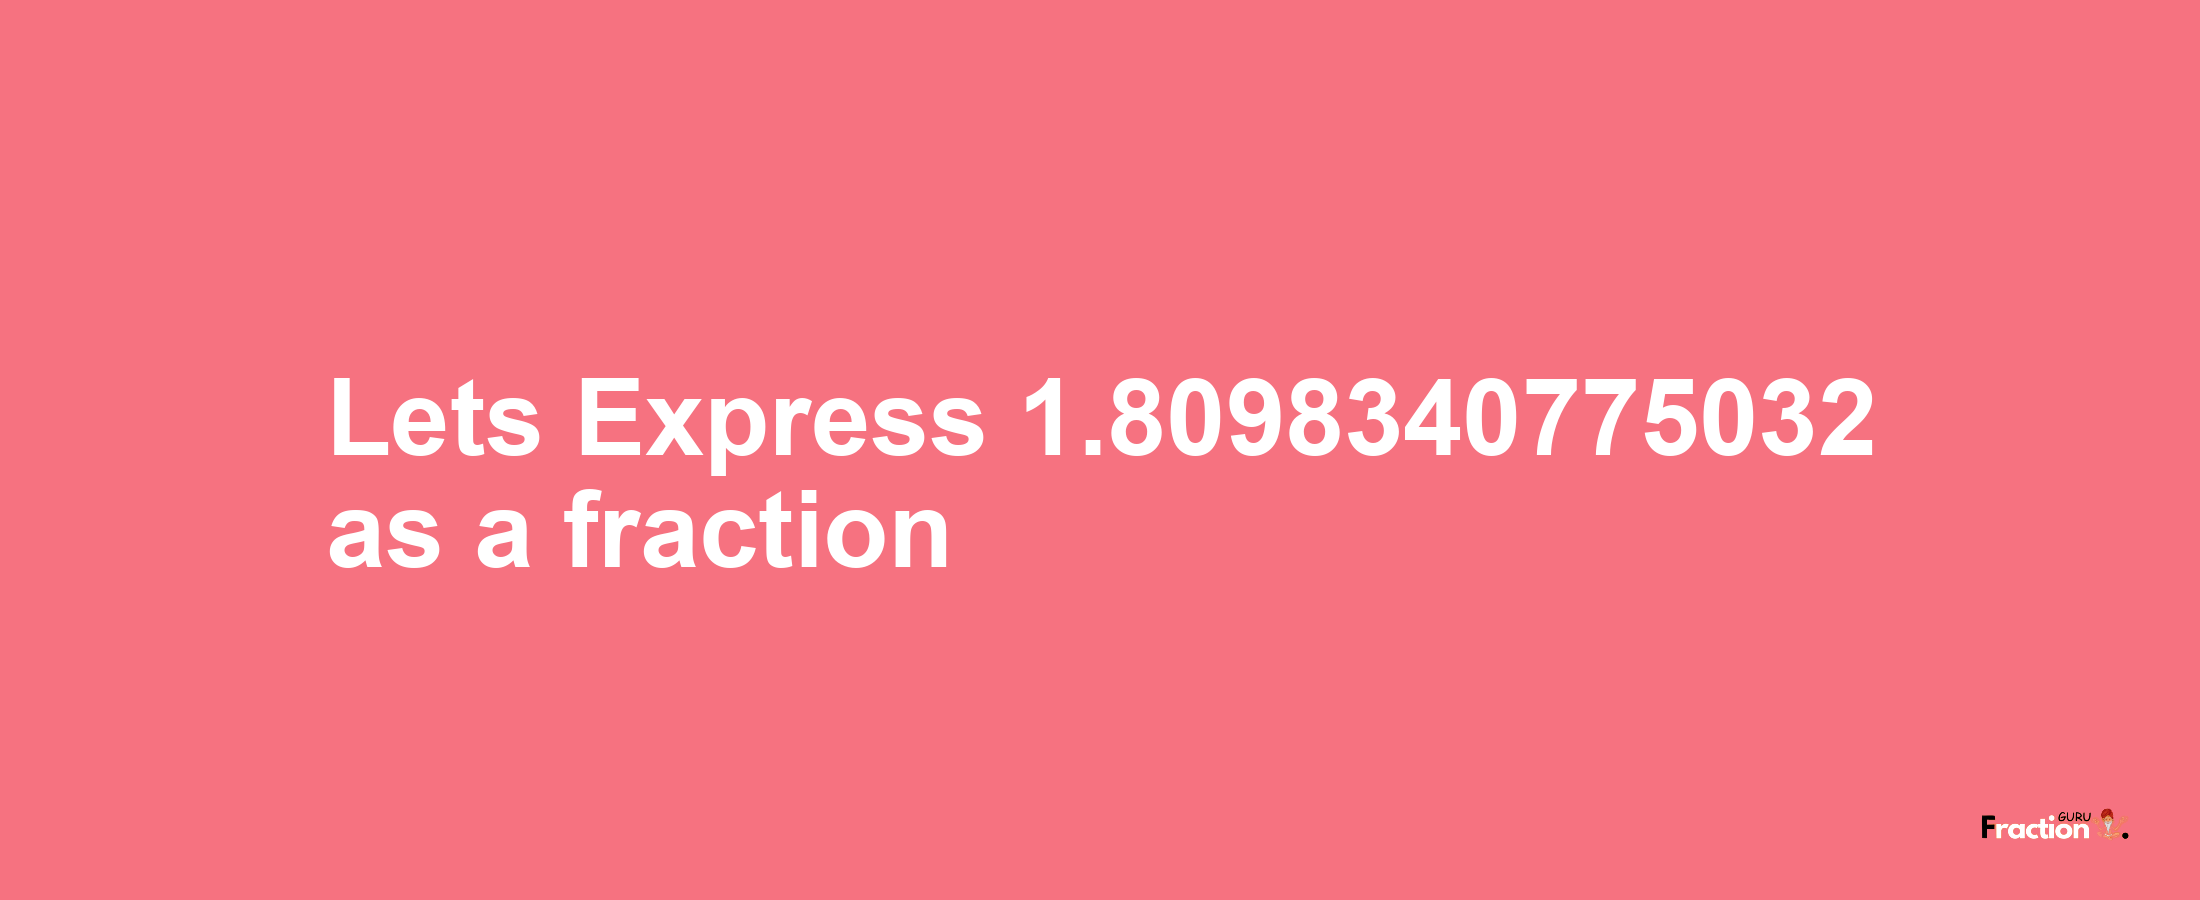 Lets Express 1.8098340775032 as afraction